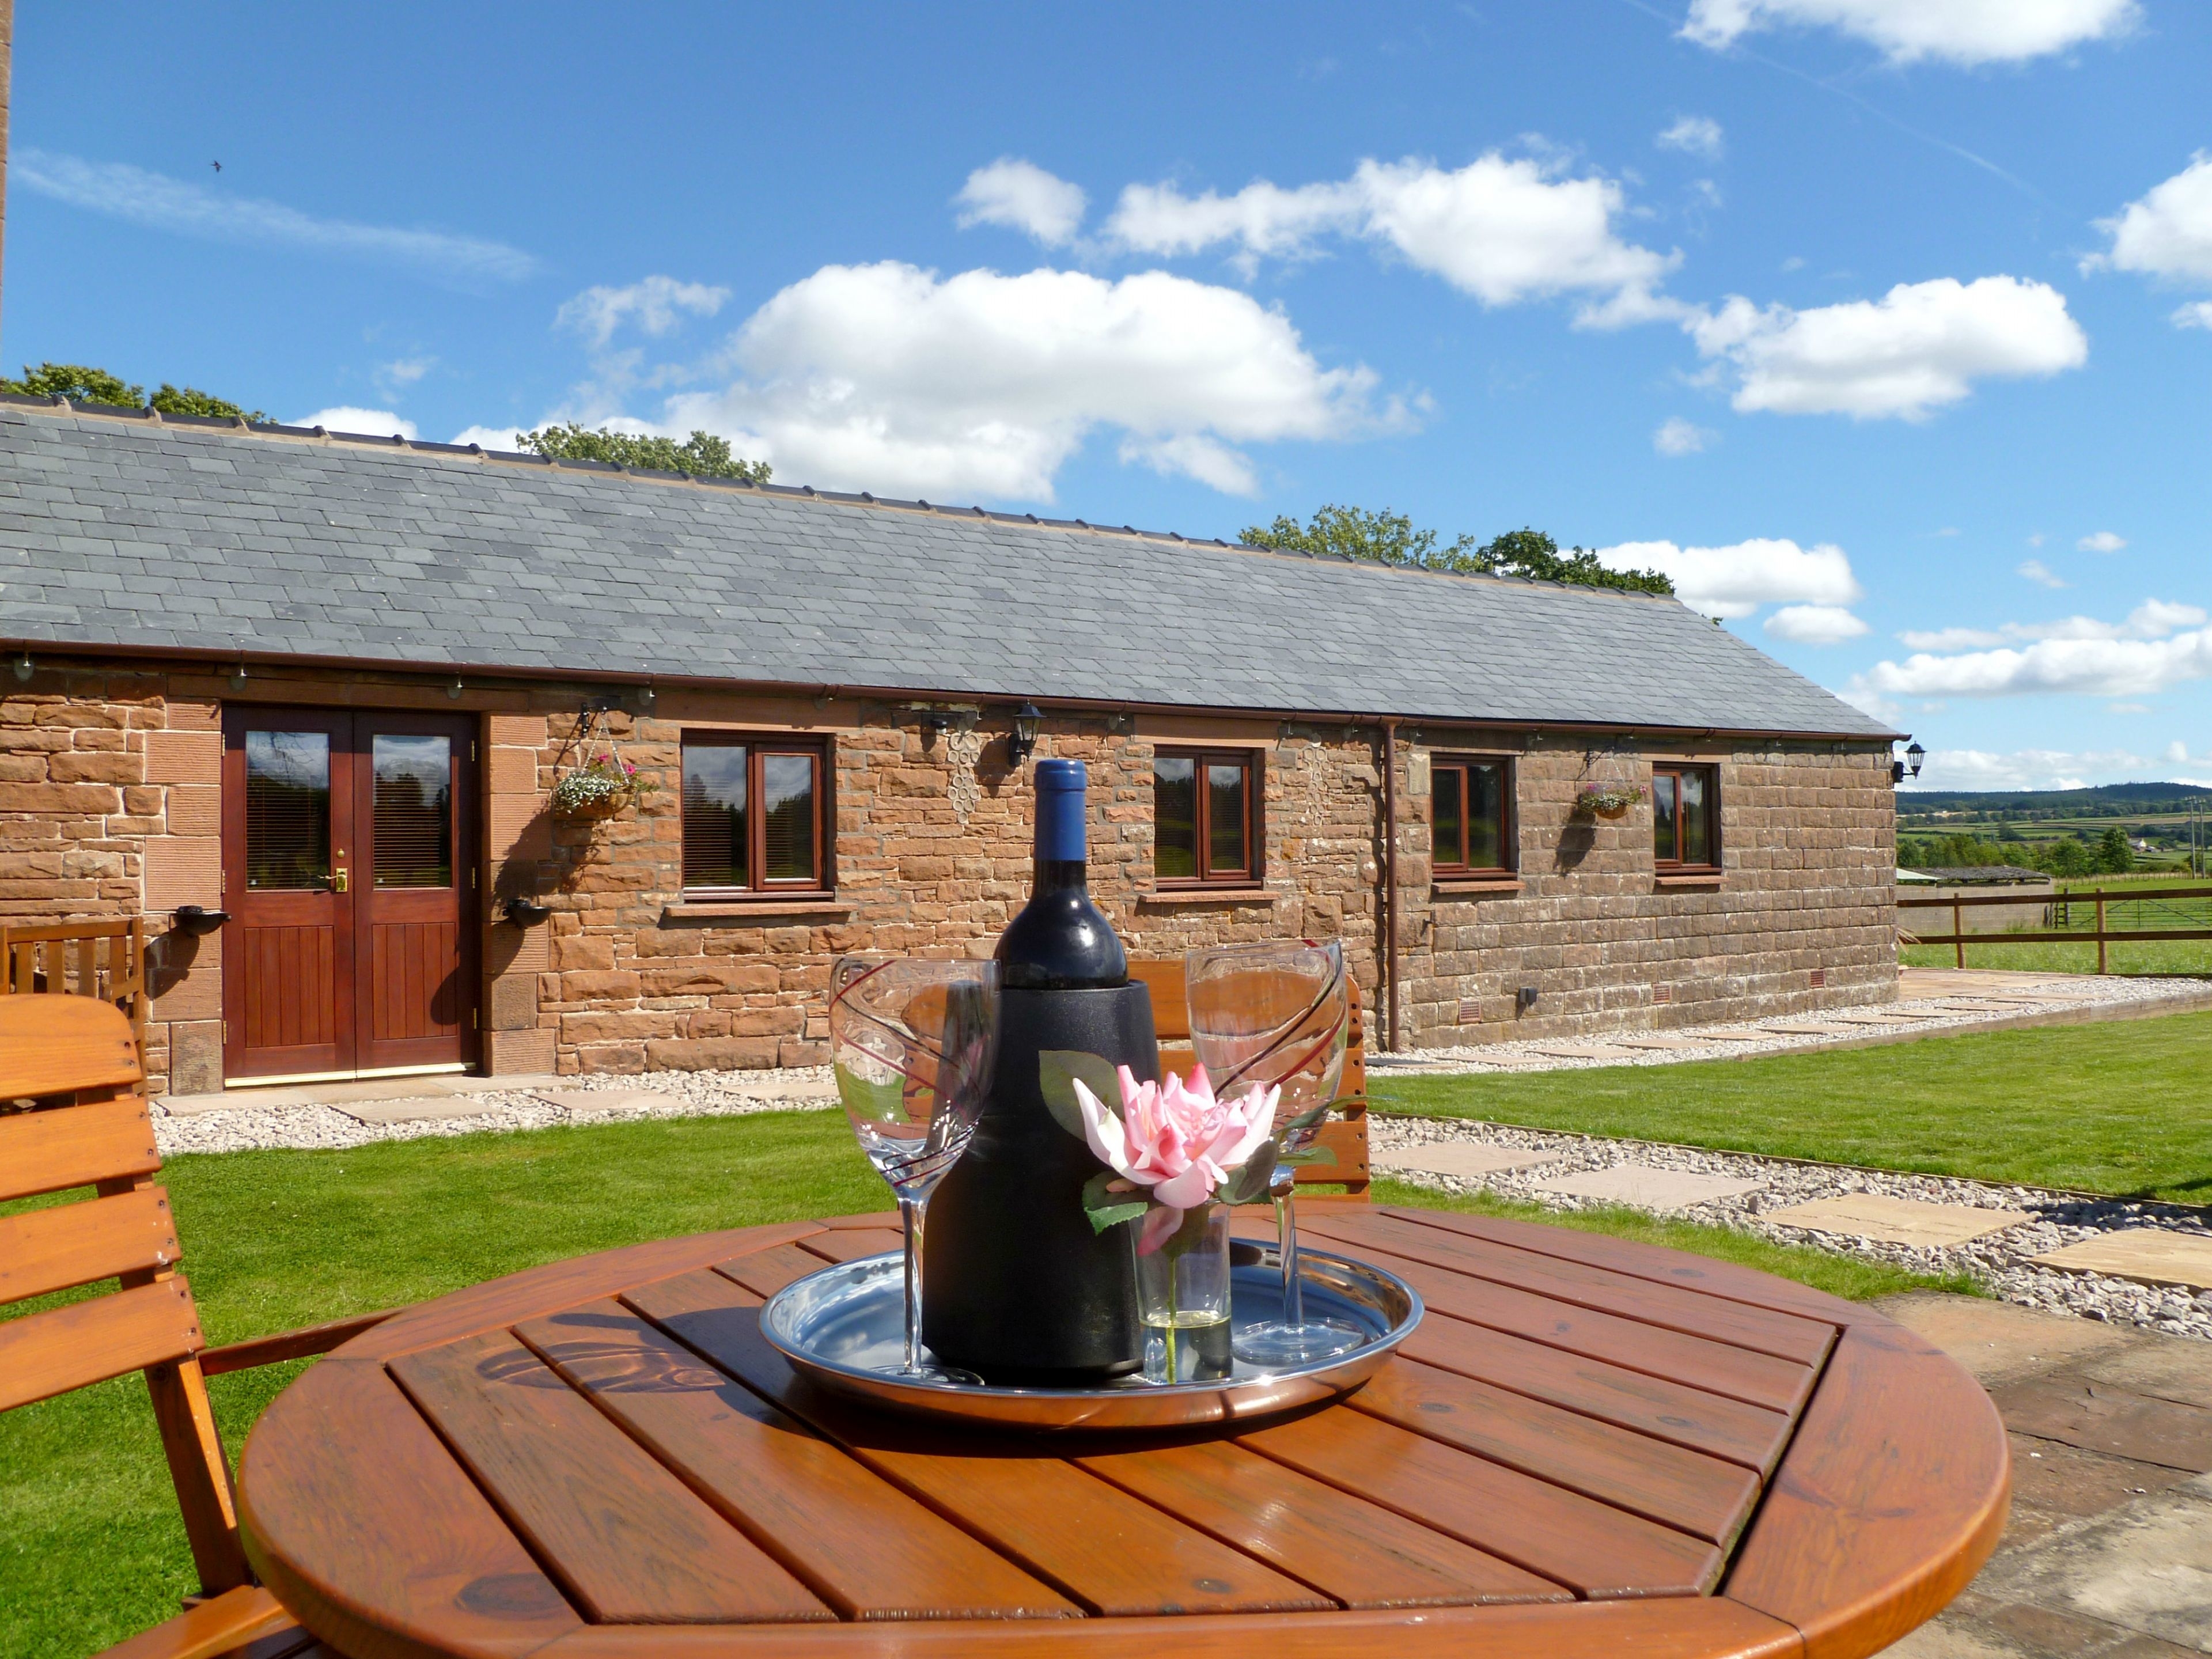 Holiday Cottages near Penrith: Daisy Cottage, Catterlen near Penrith | sykescottages.co.uk 